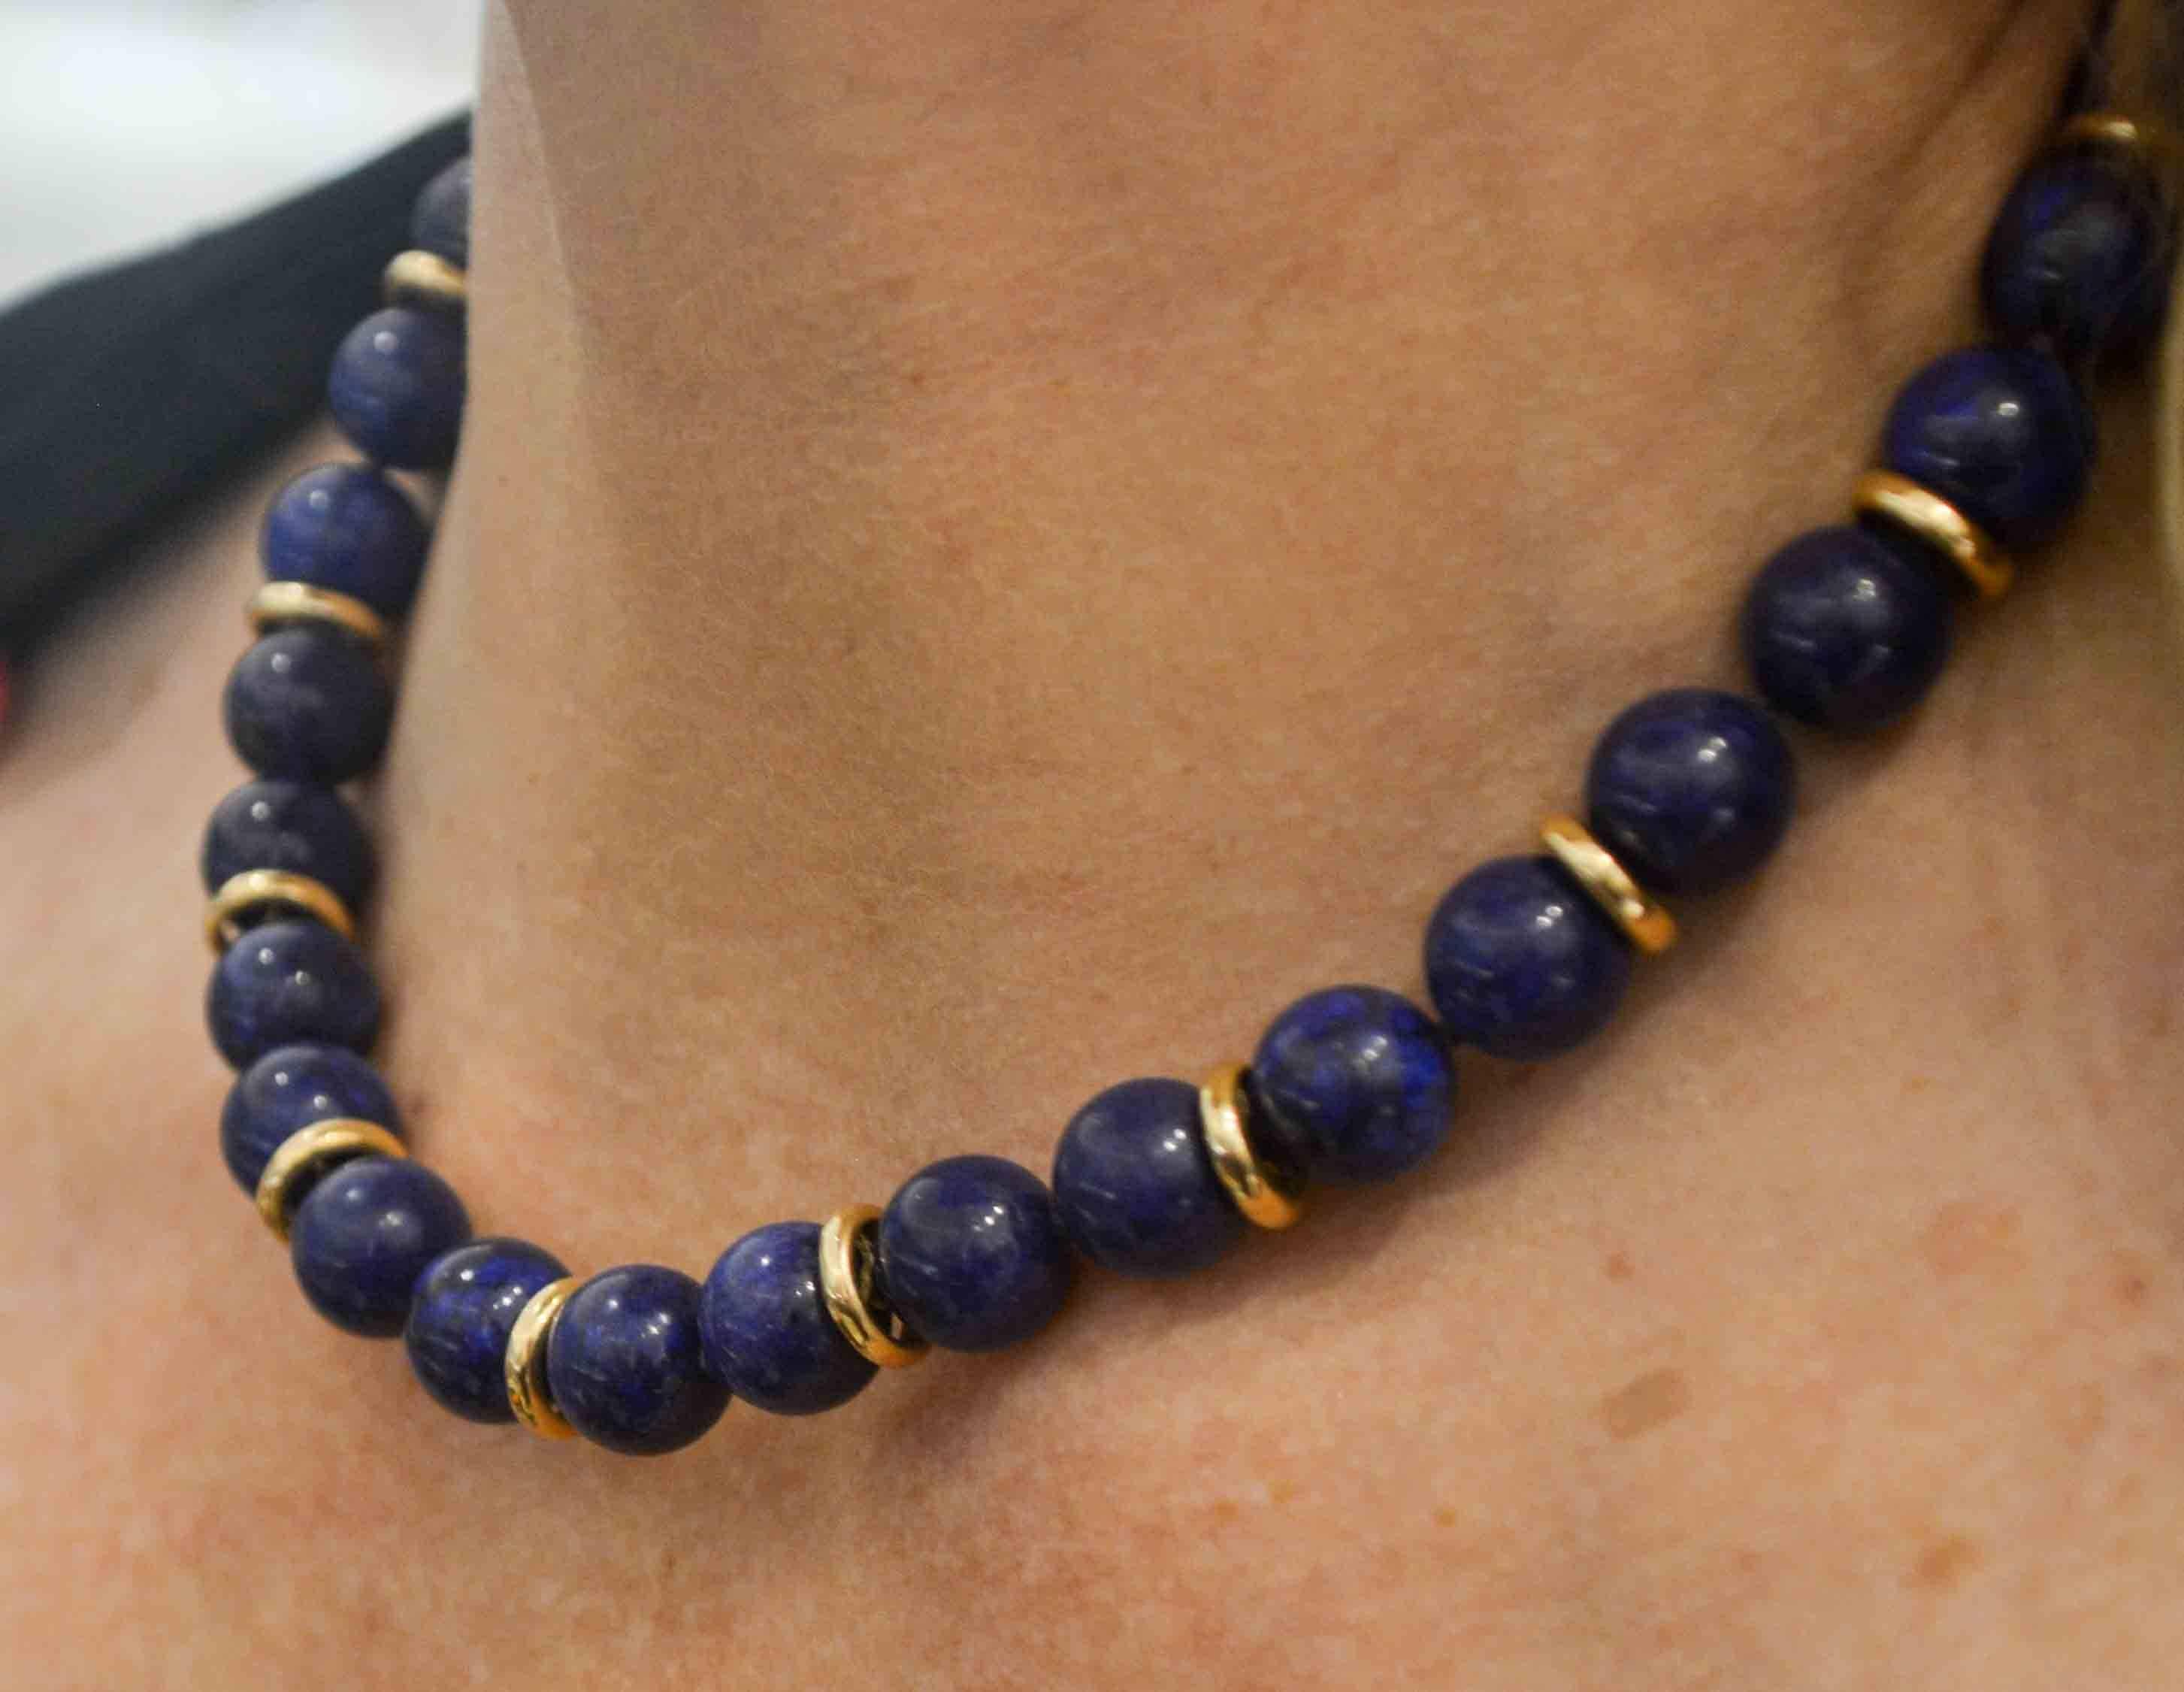 Serene shades of blue are on display in this marvelous Lapis Lazuli bead necklace that is accented with 14 karat yellow gold discs and a 14 karat gold clasp. Equally at home with a casual shirt or sophisticated dress, this Lapis Lazuli bead necklace